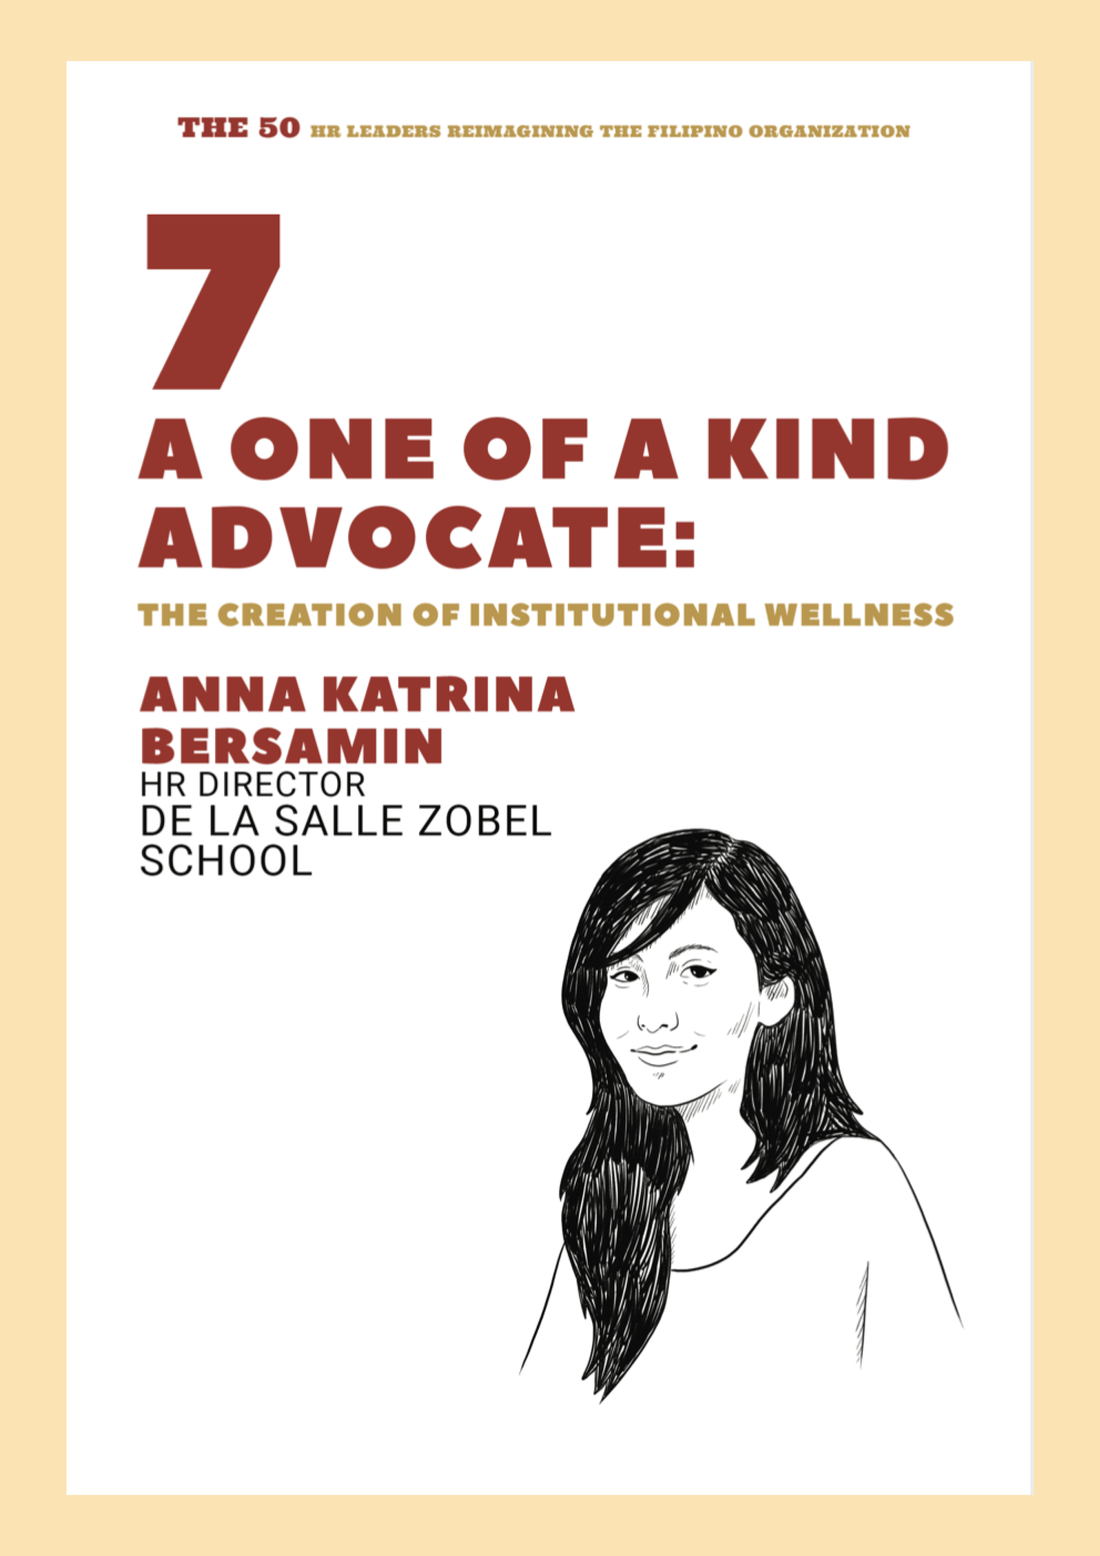 A One of a Kind Advocate: The Creation of Institutional Wellness